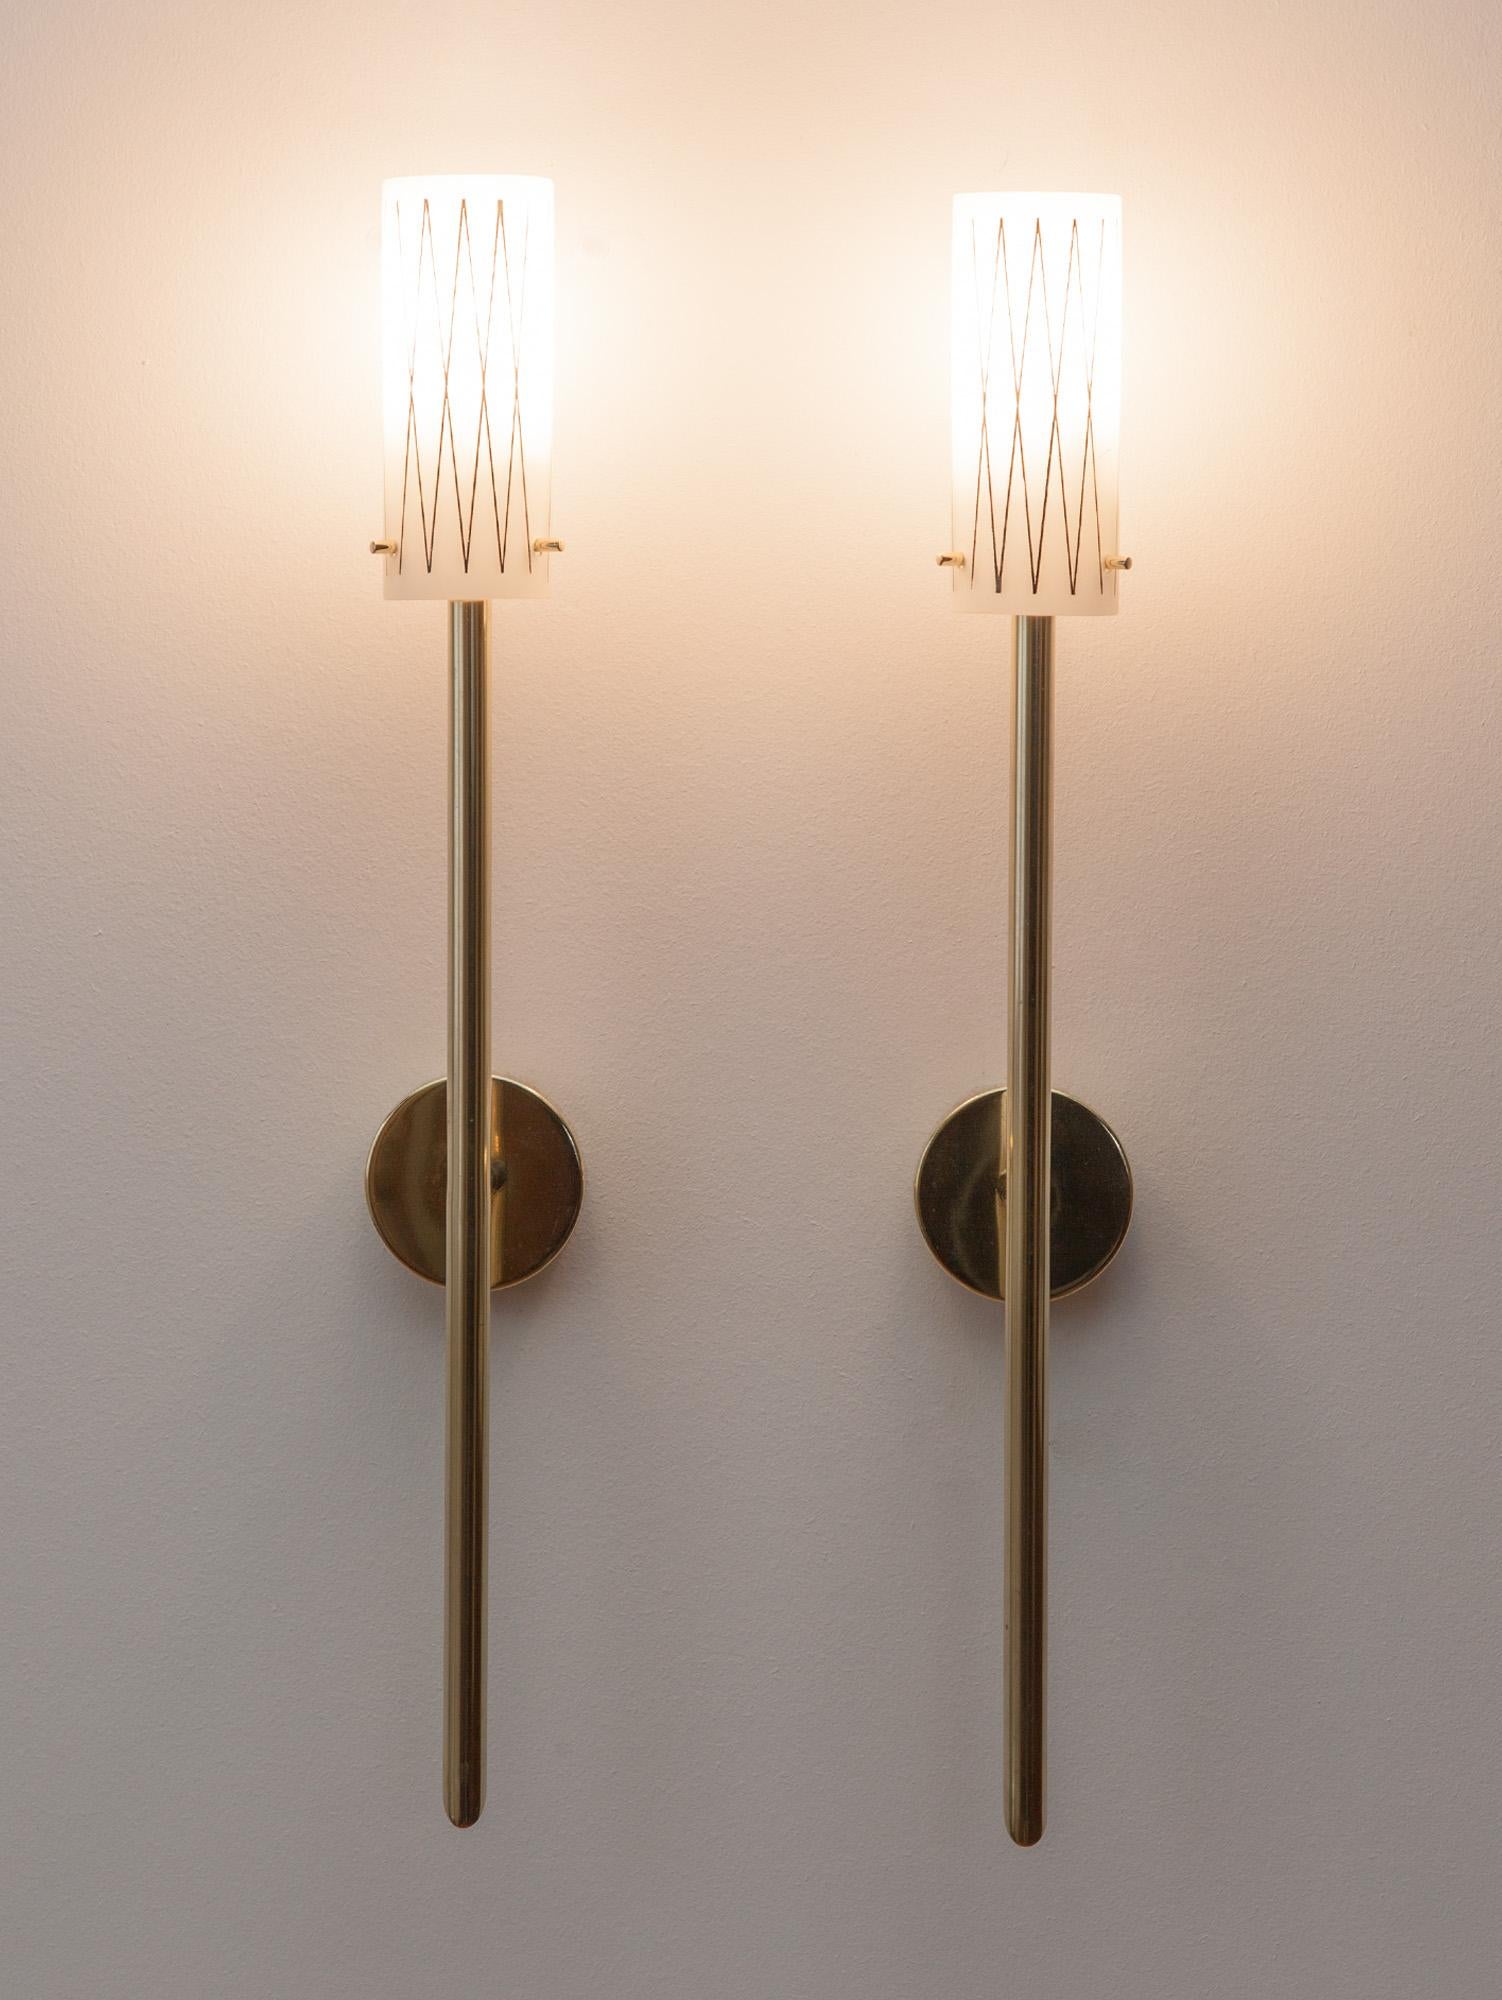 Tall and elegant Italian brass wall lights with glass shades. Crisp black geometric lines wrap around the milky white glass shade. Typical of Italian craftsmanship, attention to detail is seen throughout; from the beautifully machined brass pins,